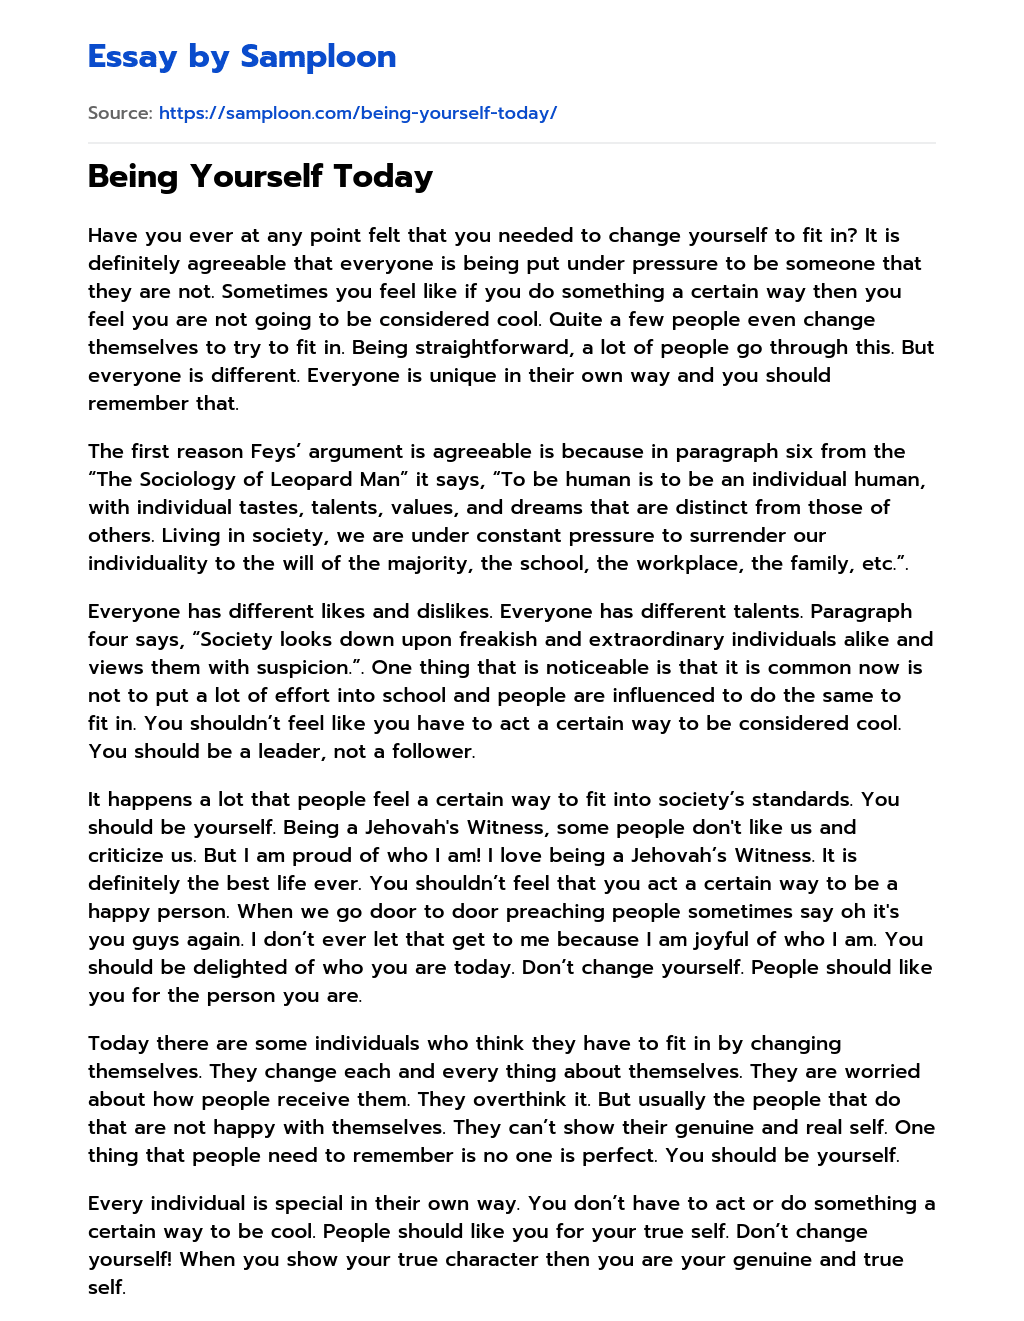 Being Yourself Today essay